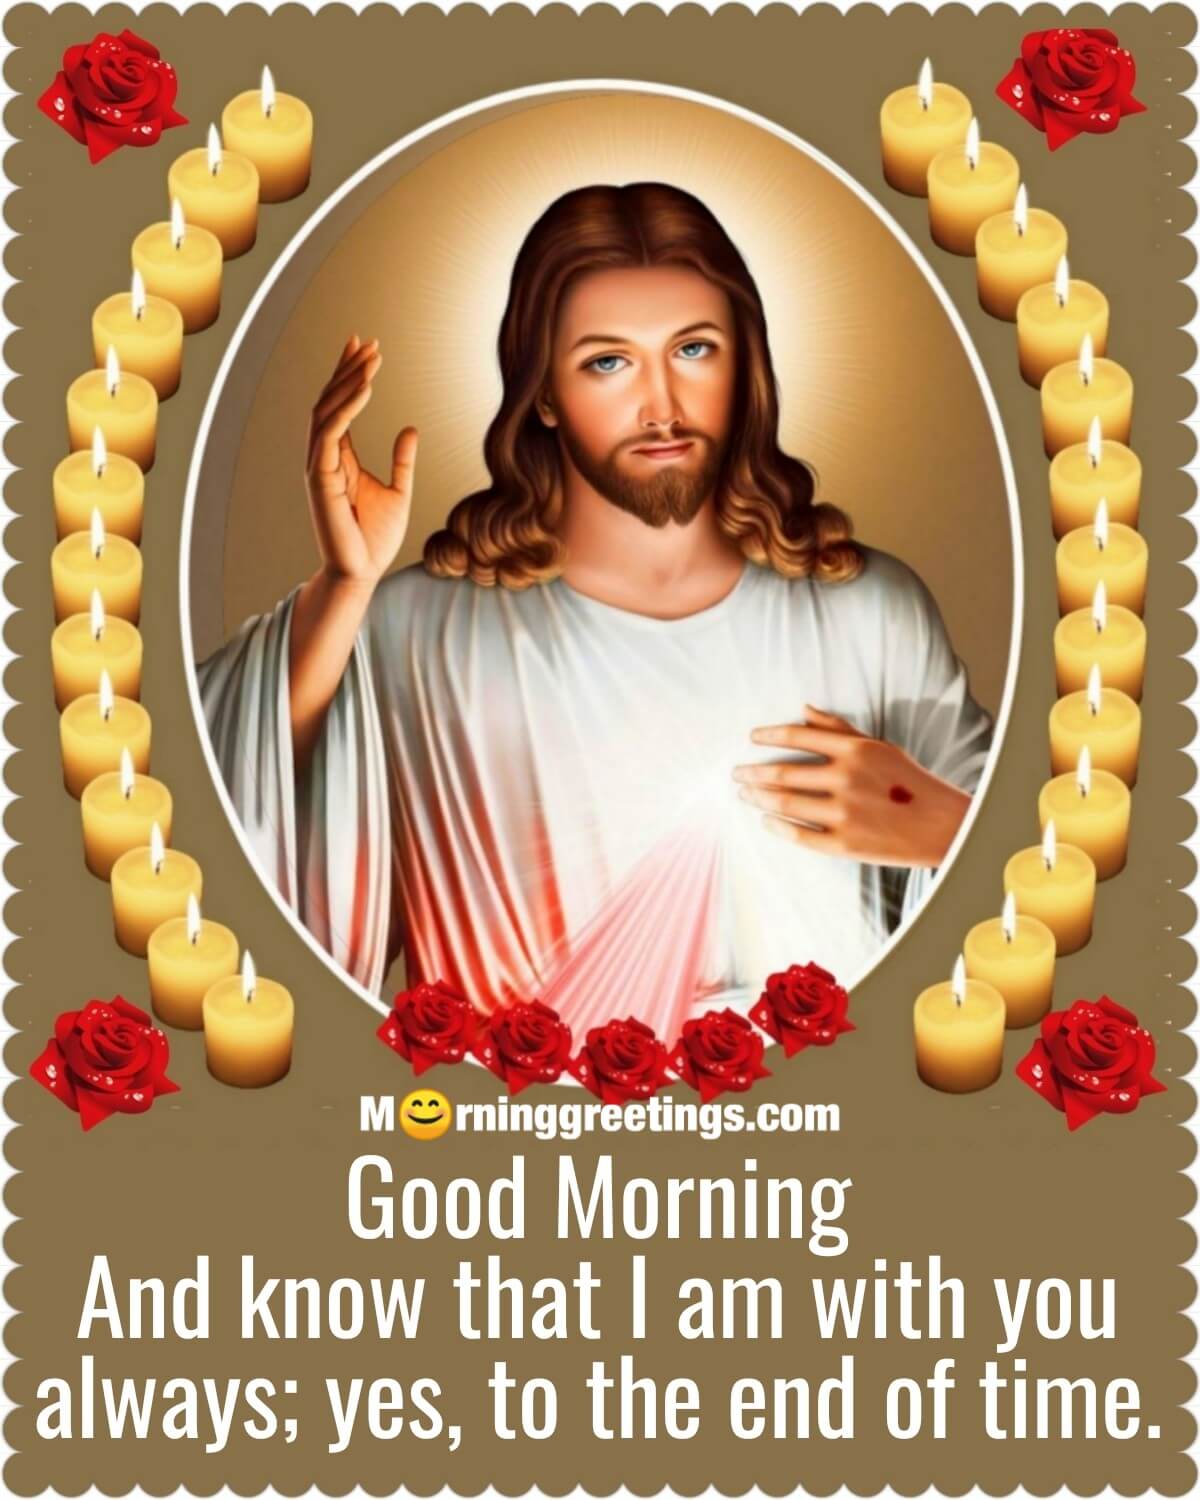 Incredible Compilation of 999+ Jesus Morning Images in Stunning 4K Quality